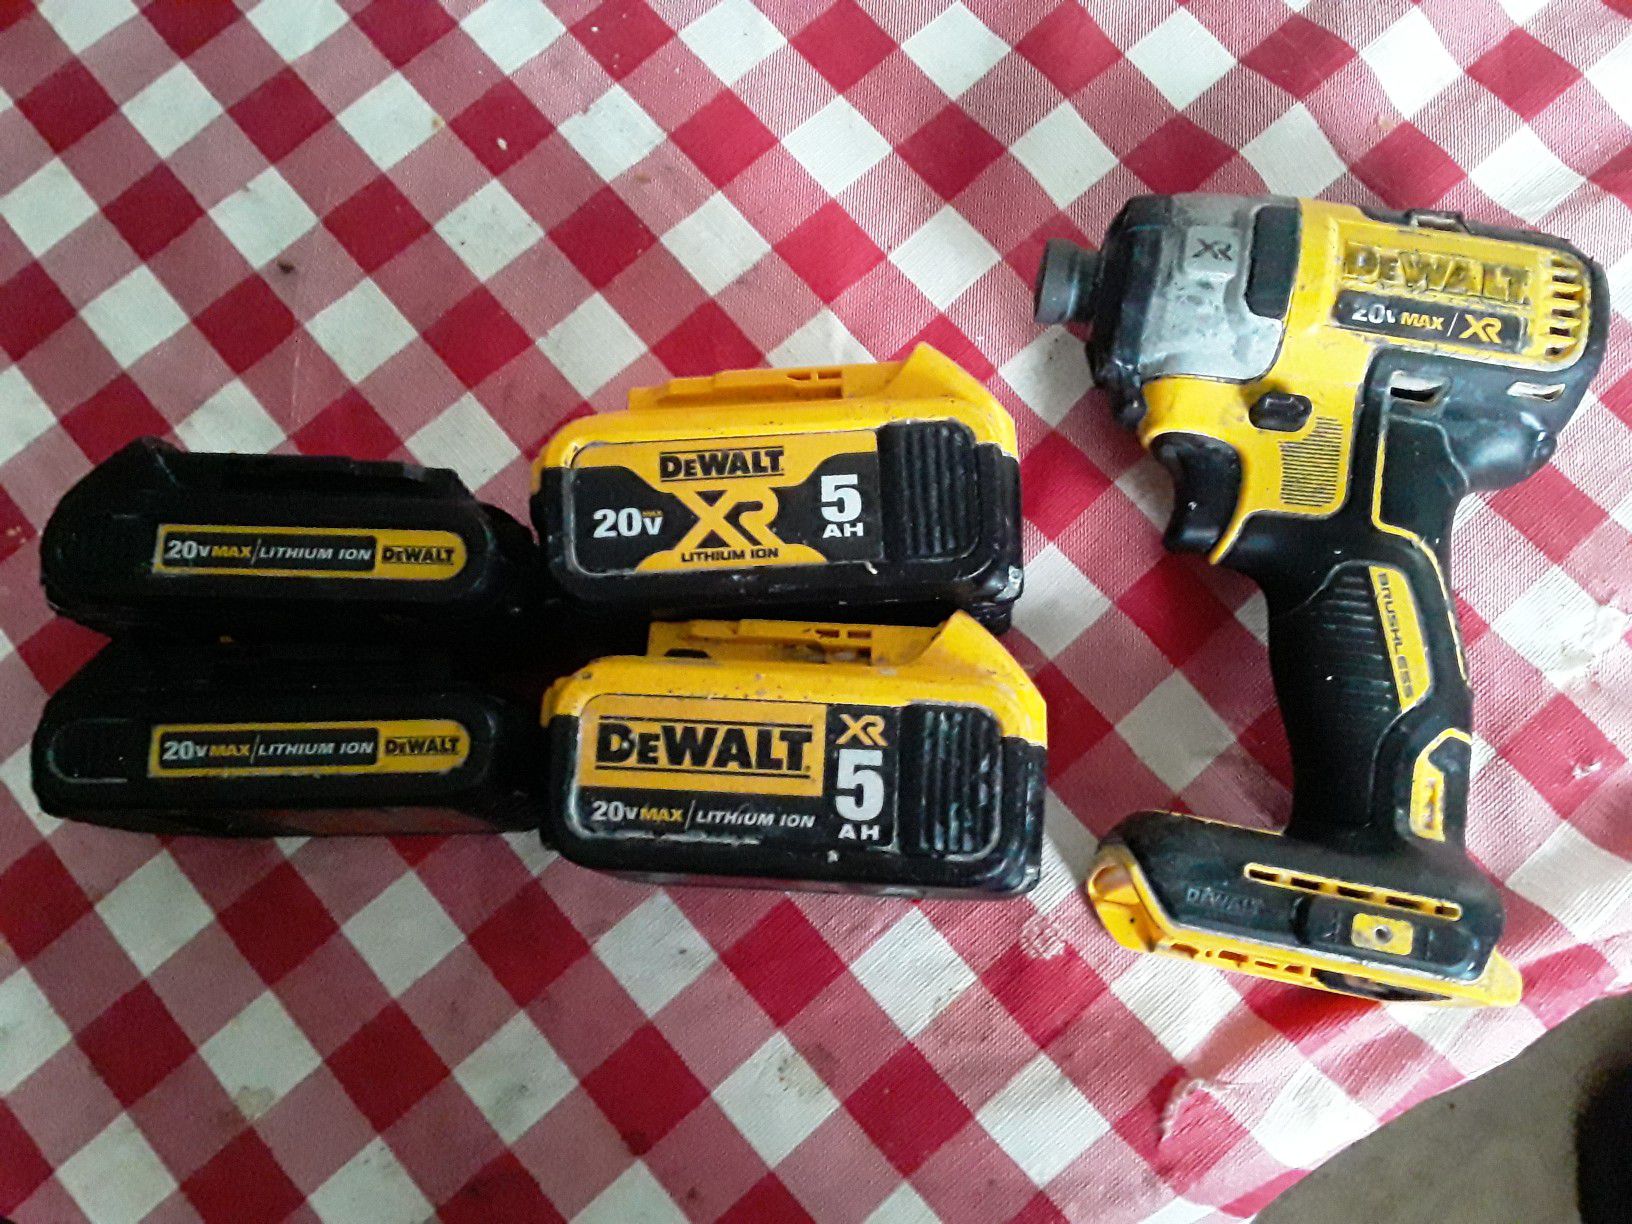 Dewalt impact drill with 4 batteries and charger